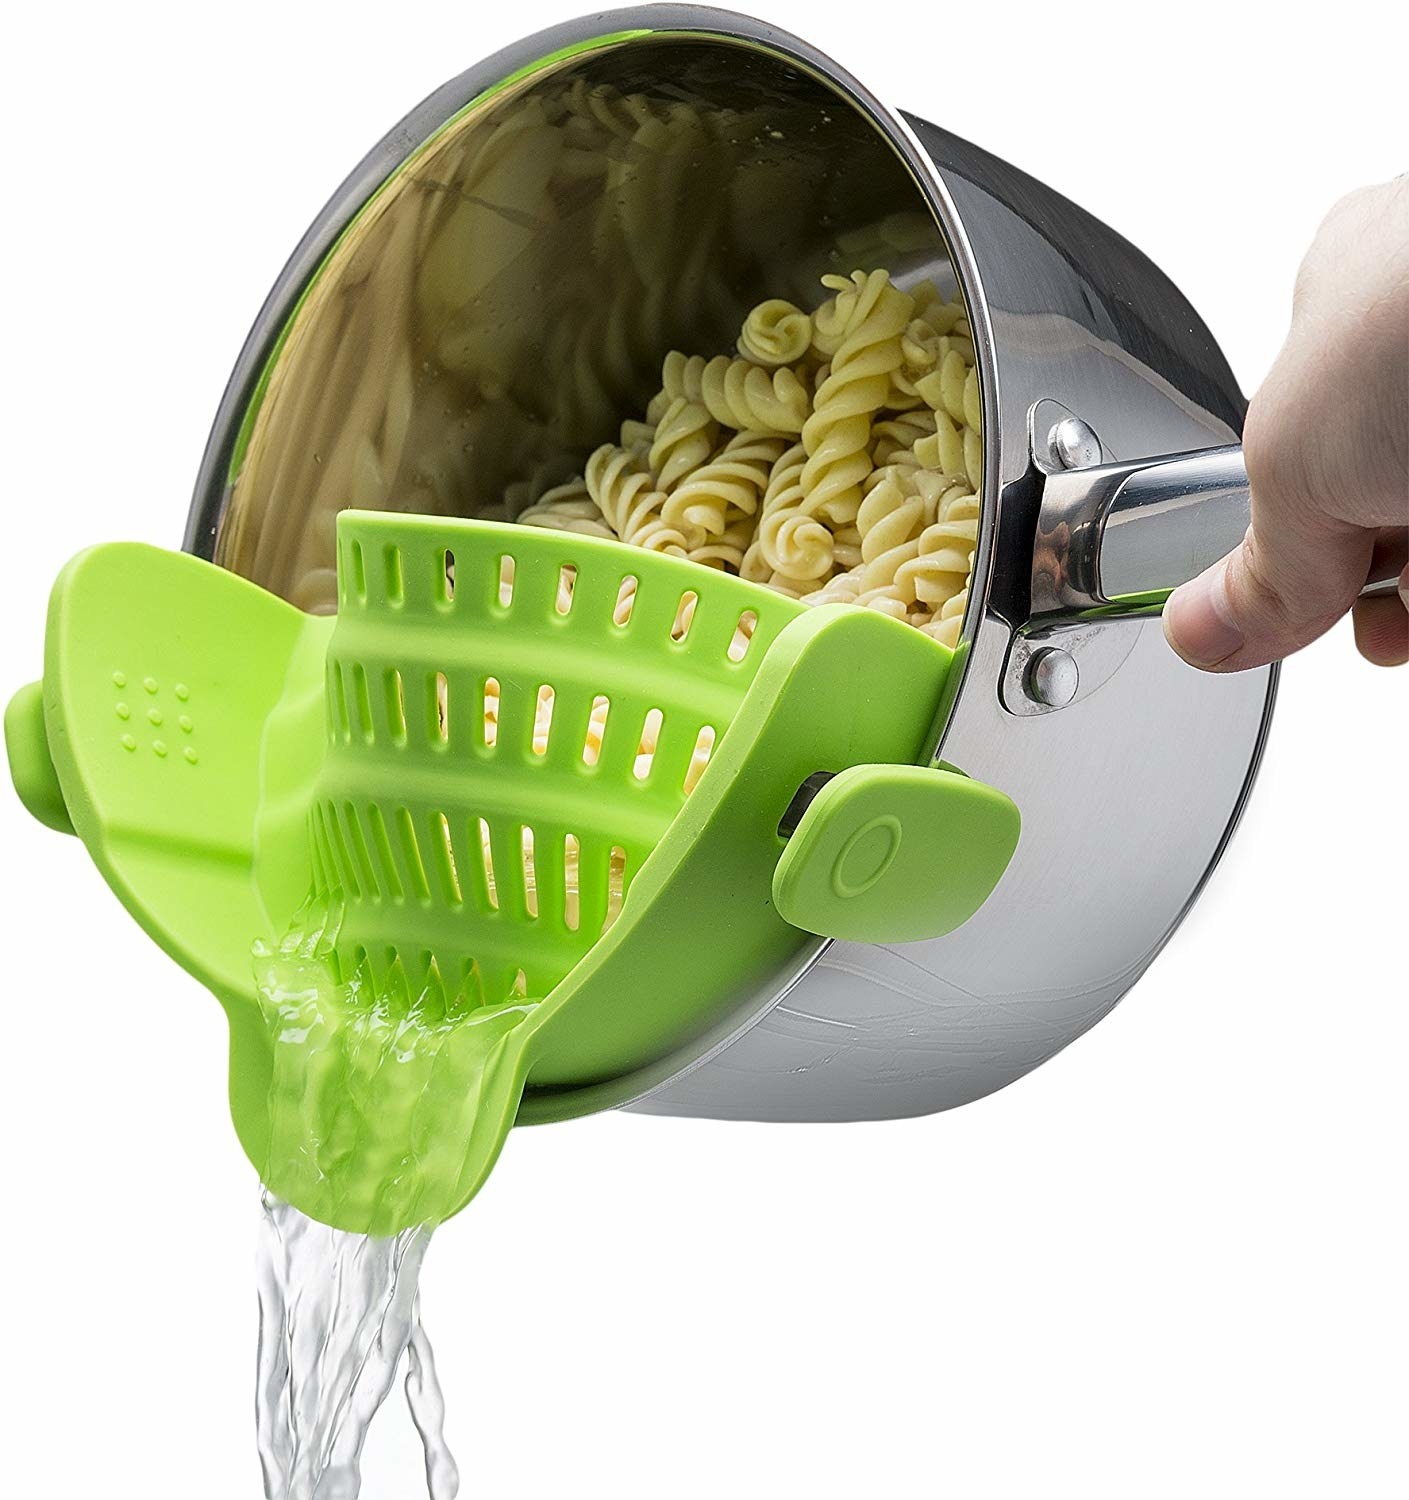 15 Creative Kitchen Tools to have a Lively and Fun filled Kitchen